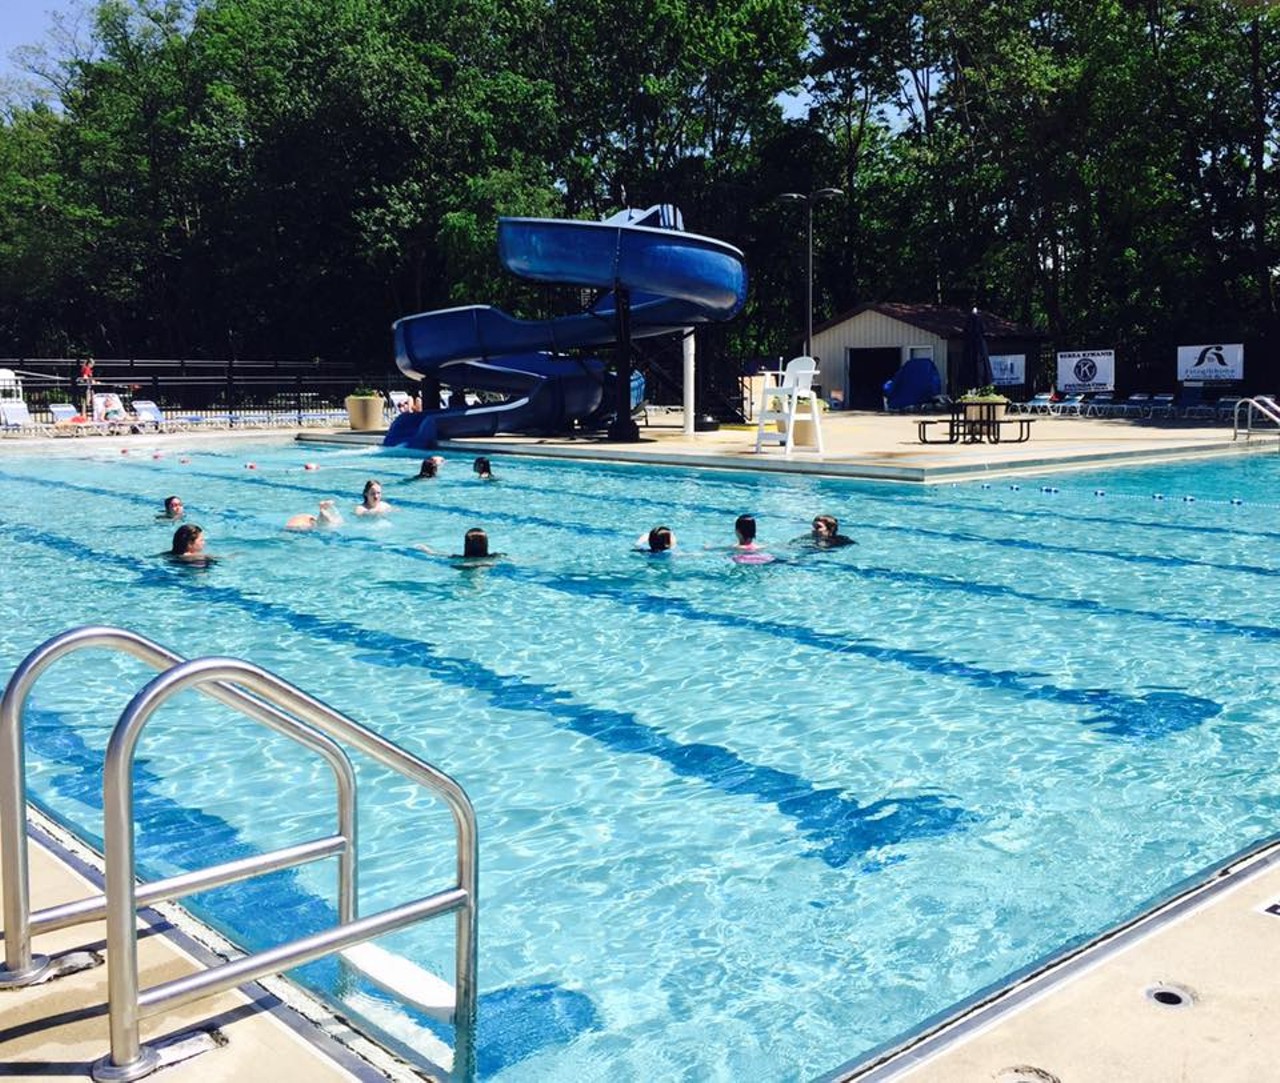  Berea Municipal Pool 
Where: Berea
Hours: 12:00 p.m. to 7:00 p.m.
Features: Water Slide, Diving Area
Photo via City of Berea